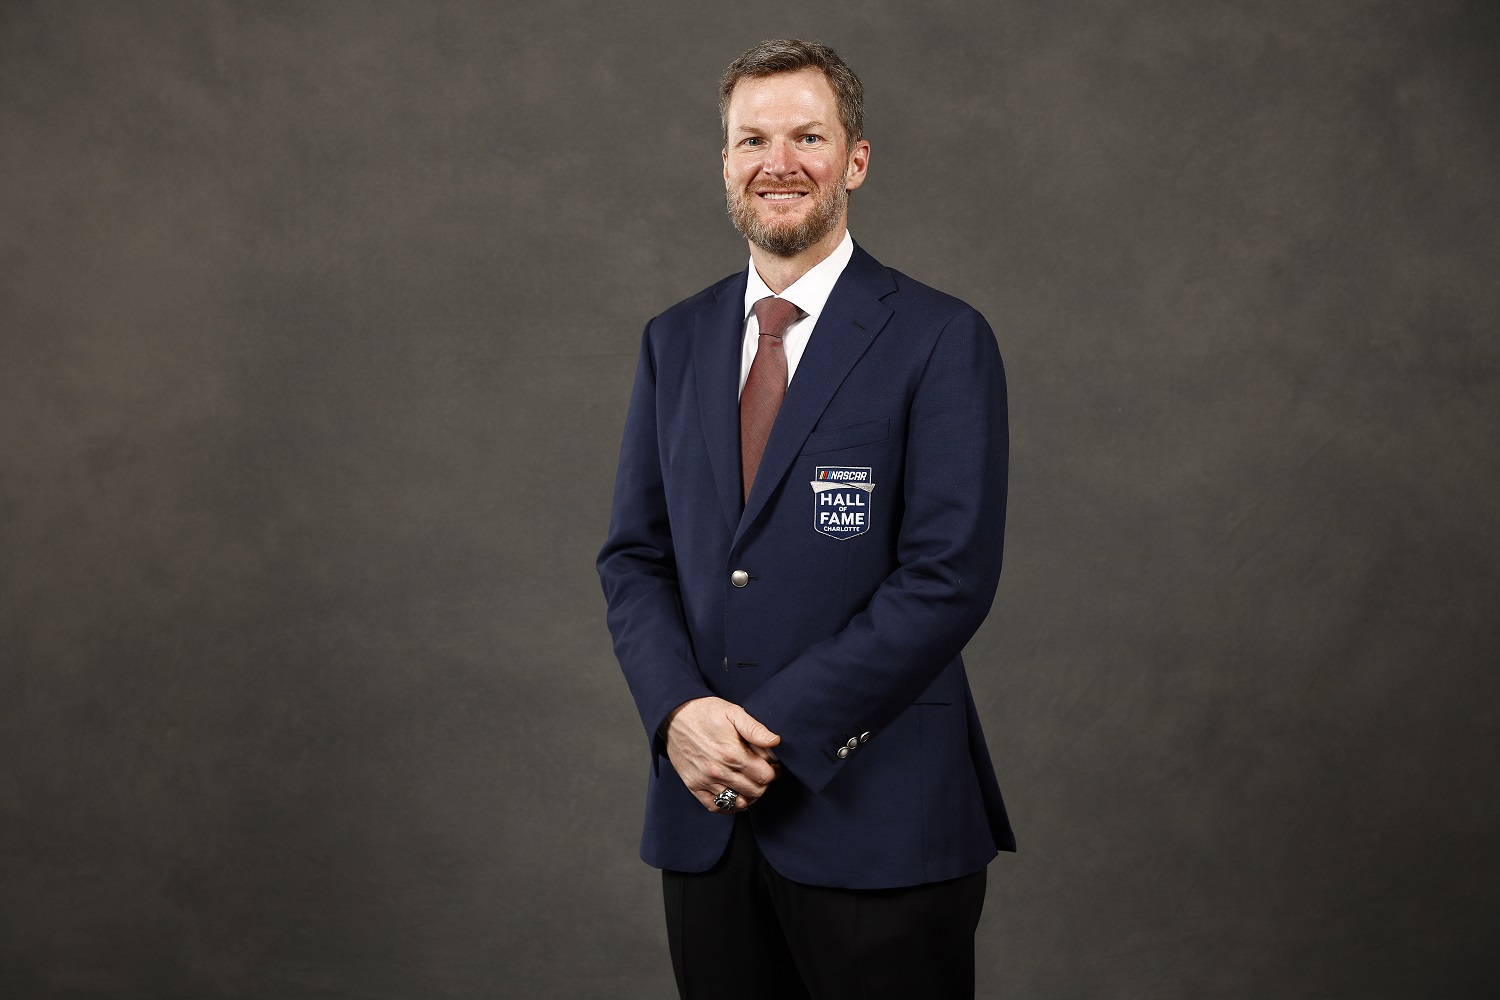 Inductee Dale Earnhardt Jr. poses for a portrait during the 2021 NASCAR Hall of Fame Induction Ceremony at NASCAR Hall of Fame on Jan. 21, 2022, in Charlotte, North Carolina. | Jared C. Tilton/Getty Images